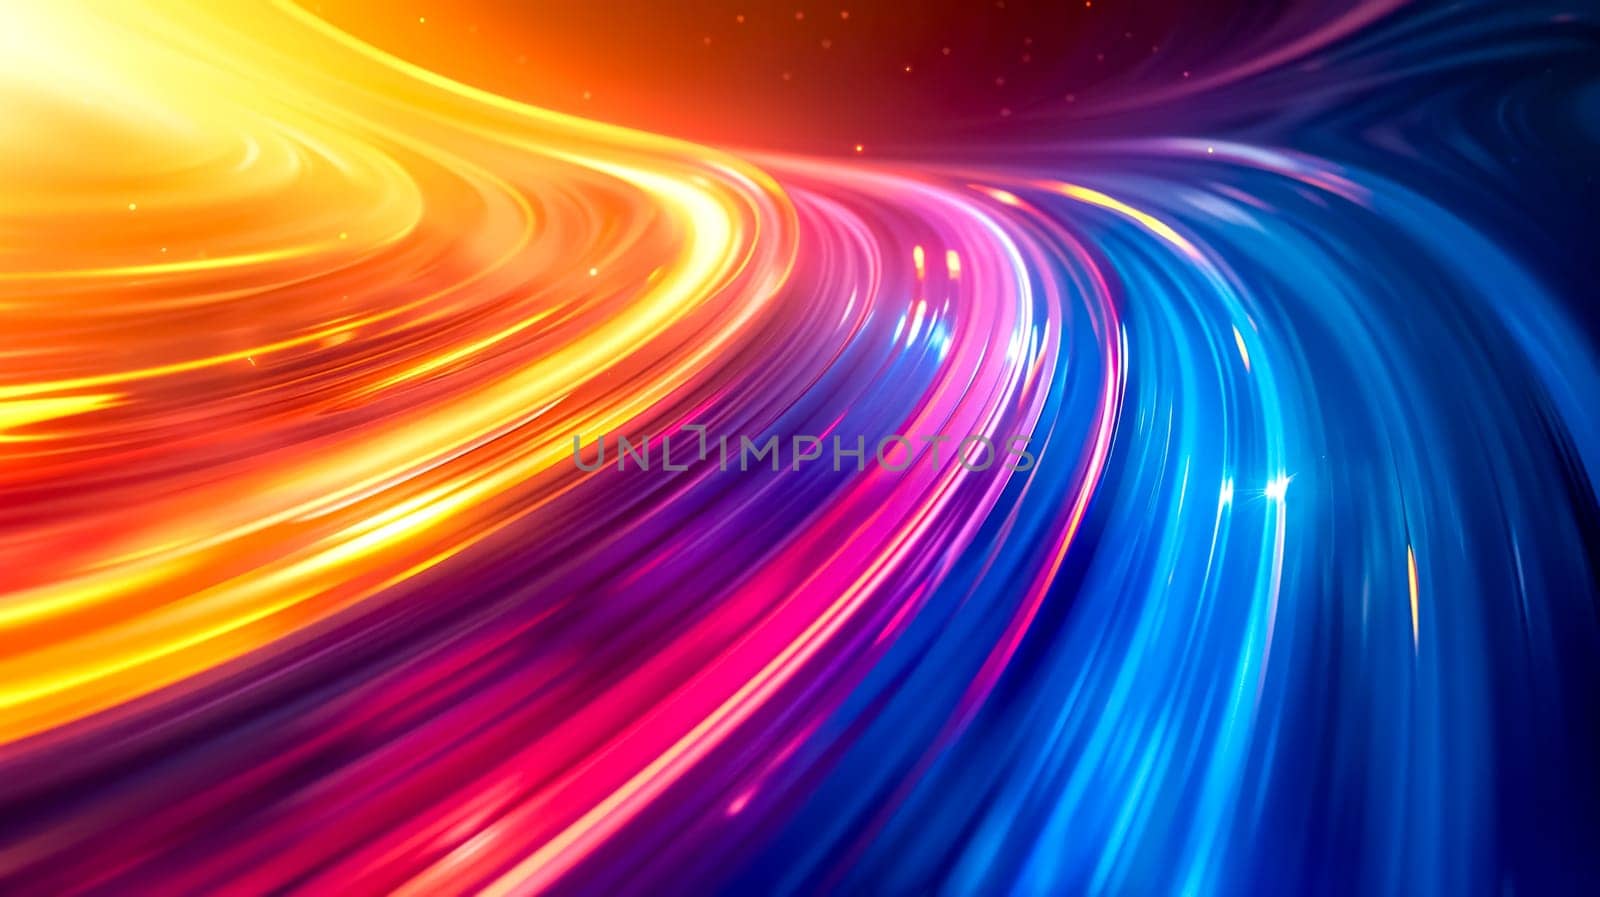 Colorful abstract light wave background by Edophoto